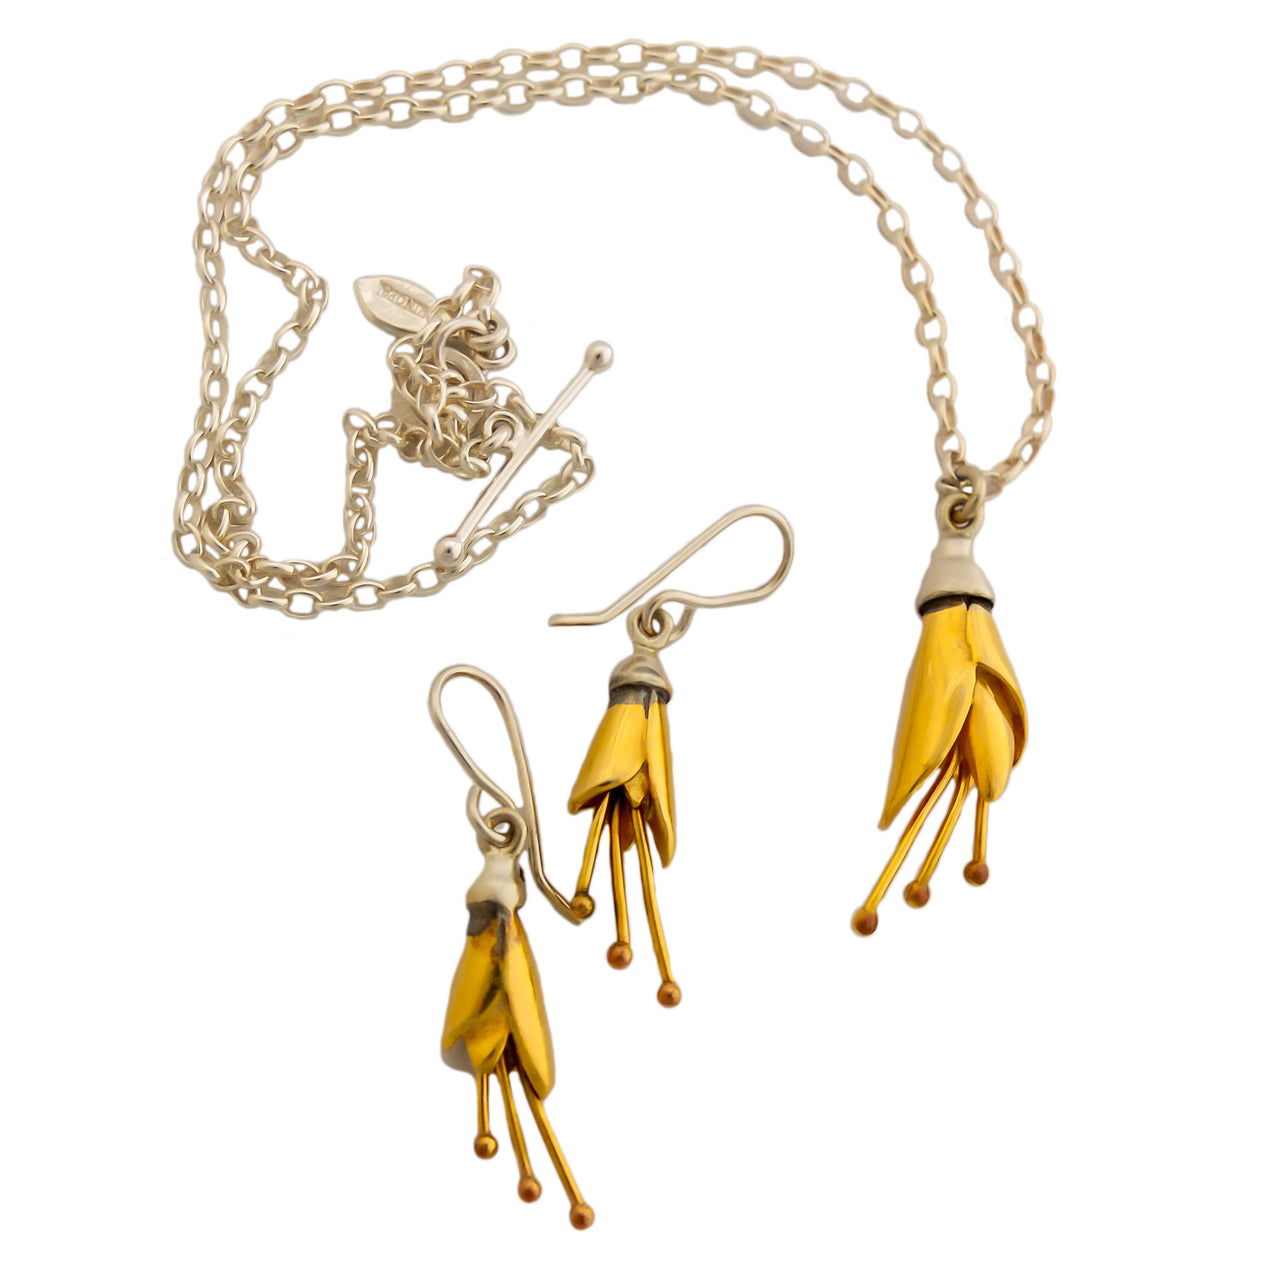 Kowhai Necklace and Earrings, Silver flowers dipped in Yellow Gold by nz jewellery designer Martyn Milligan 